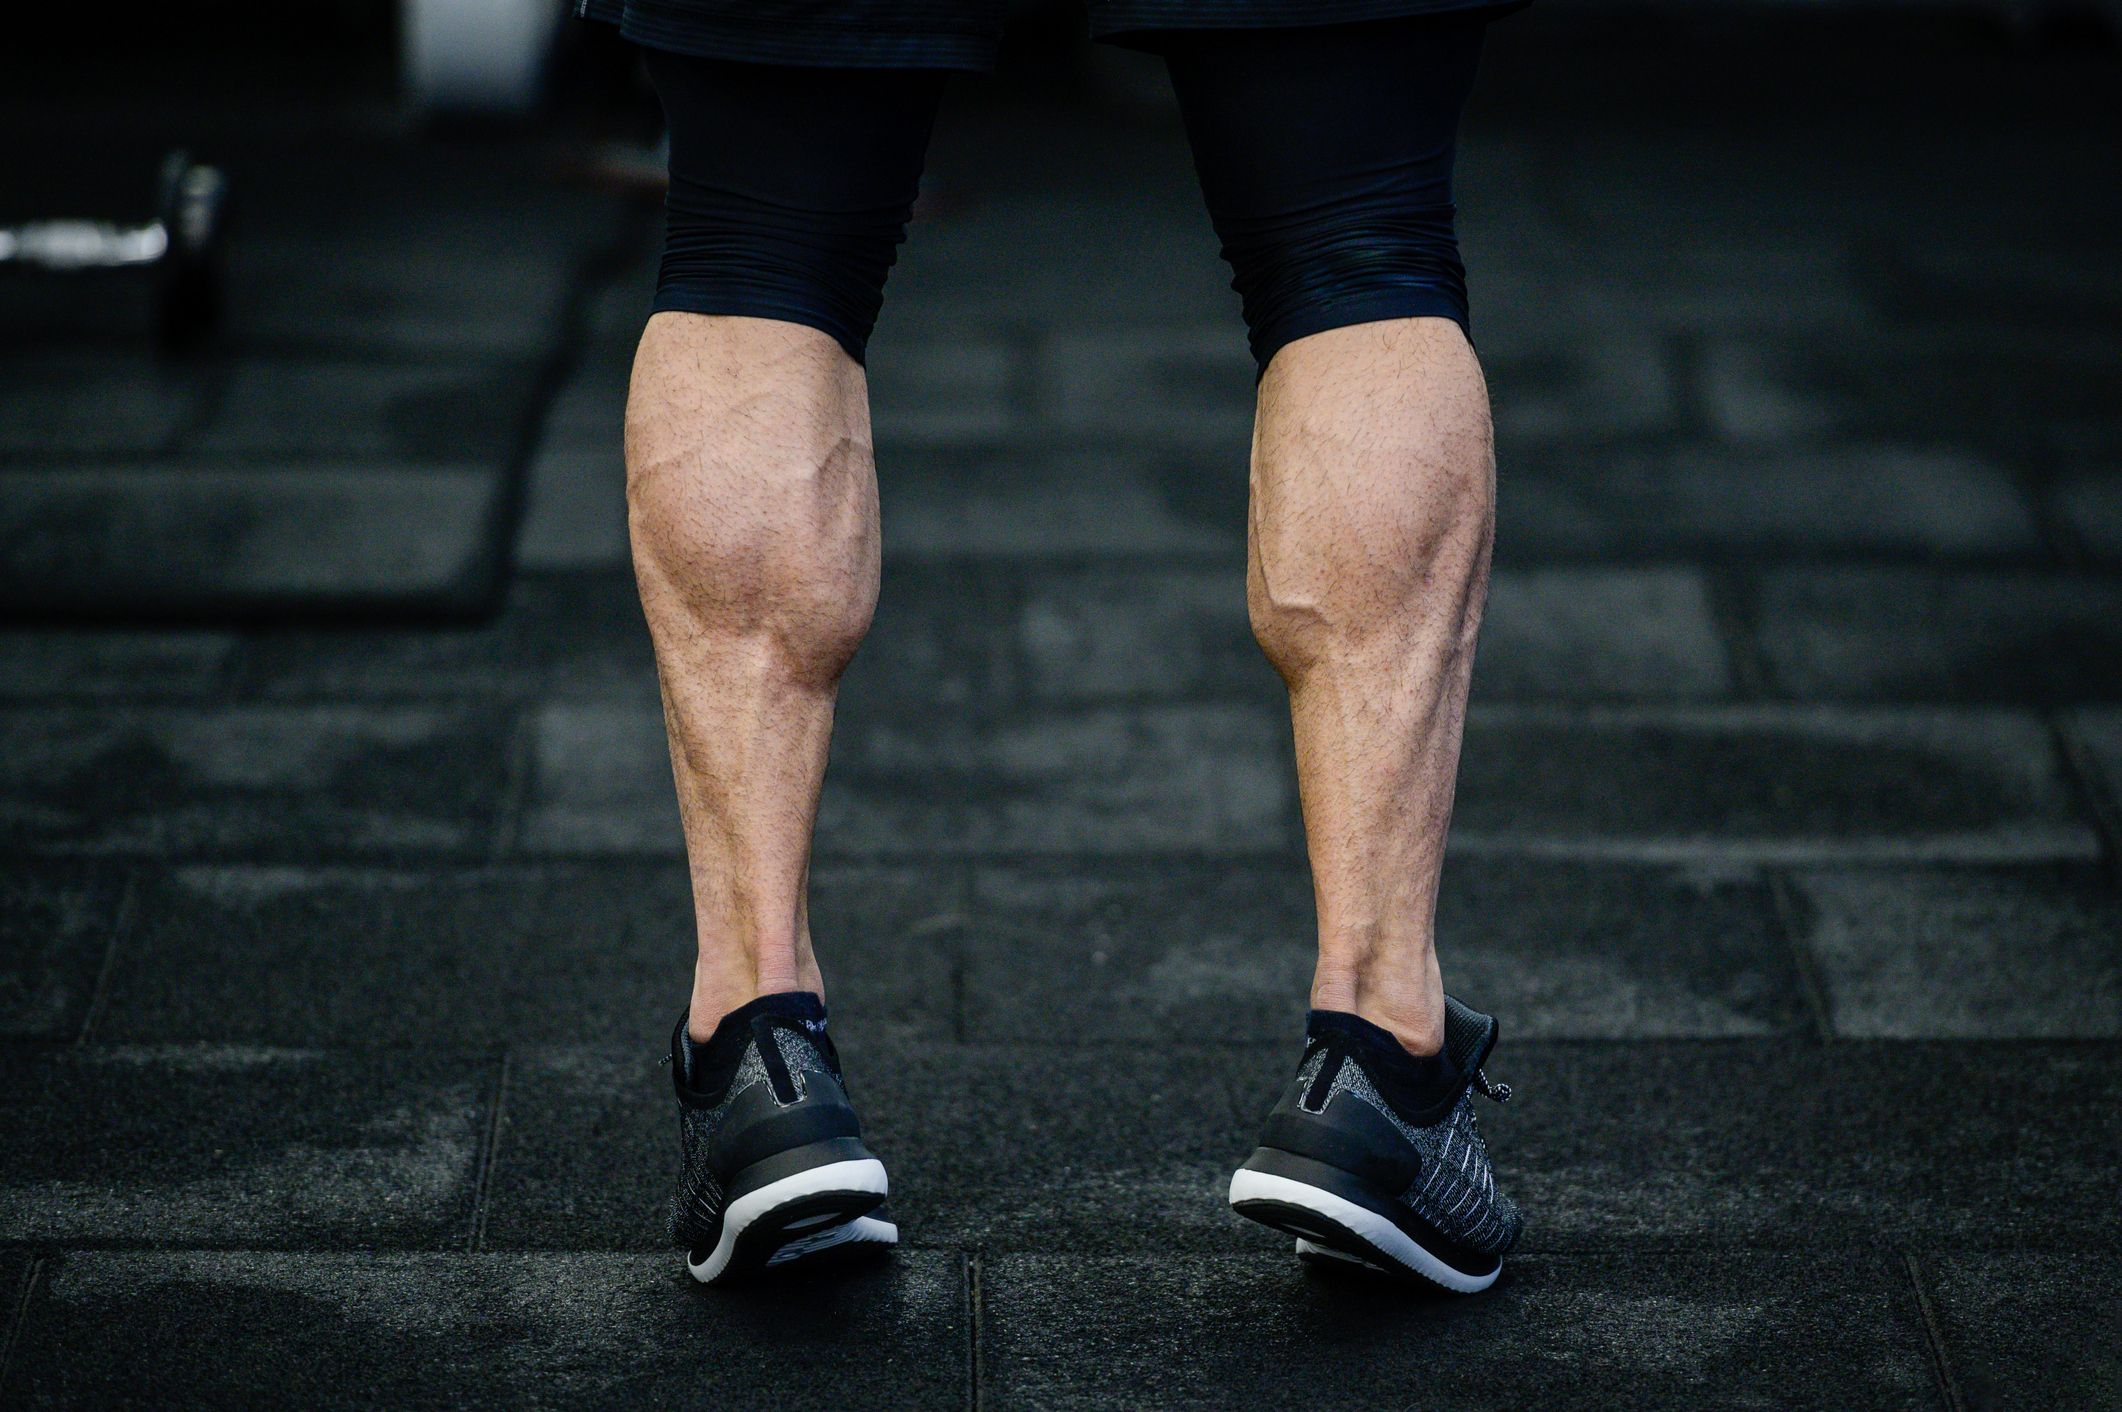 HFT 2.0: The Good, The Bad, and How to Build Bigger Calves